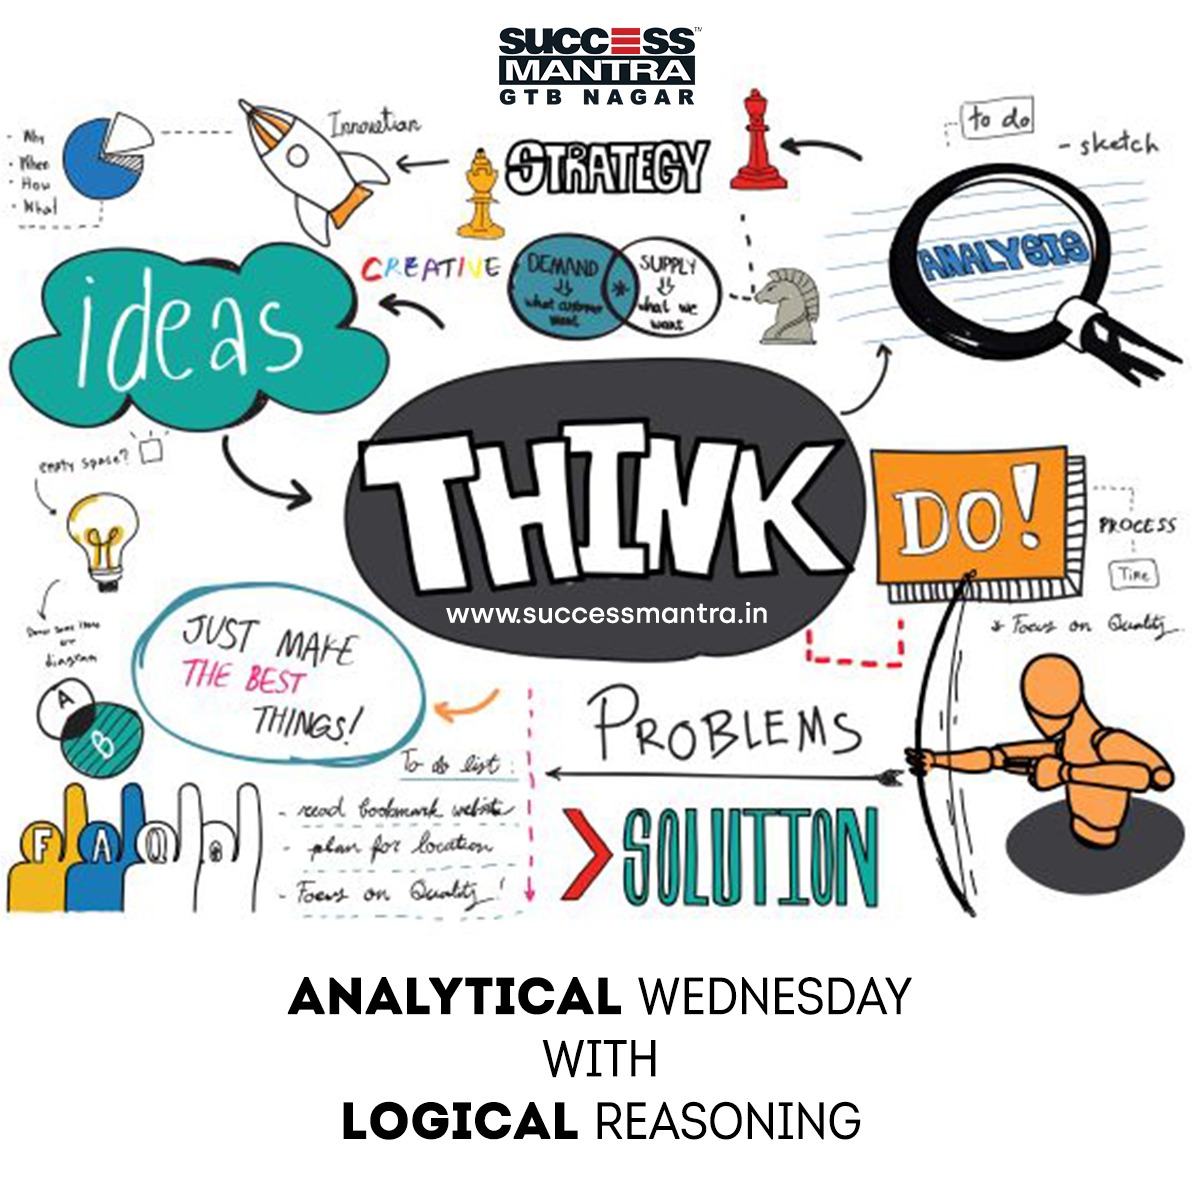 Questions on Logical Reasoning SMLRQ020